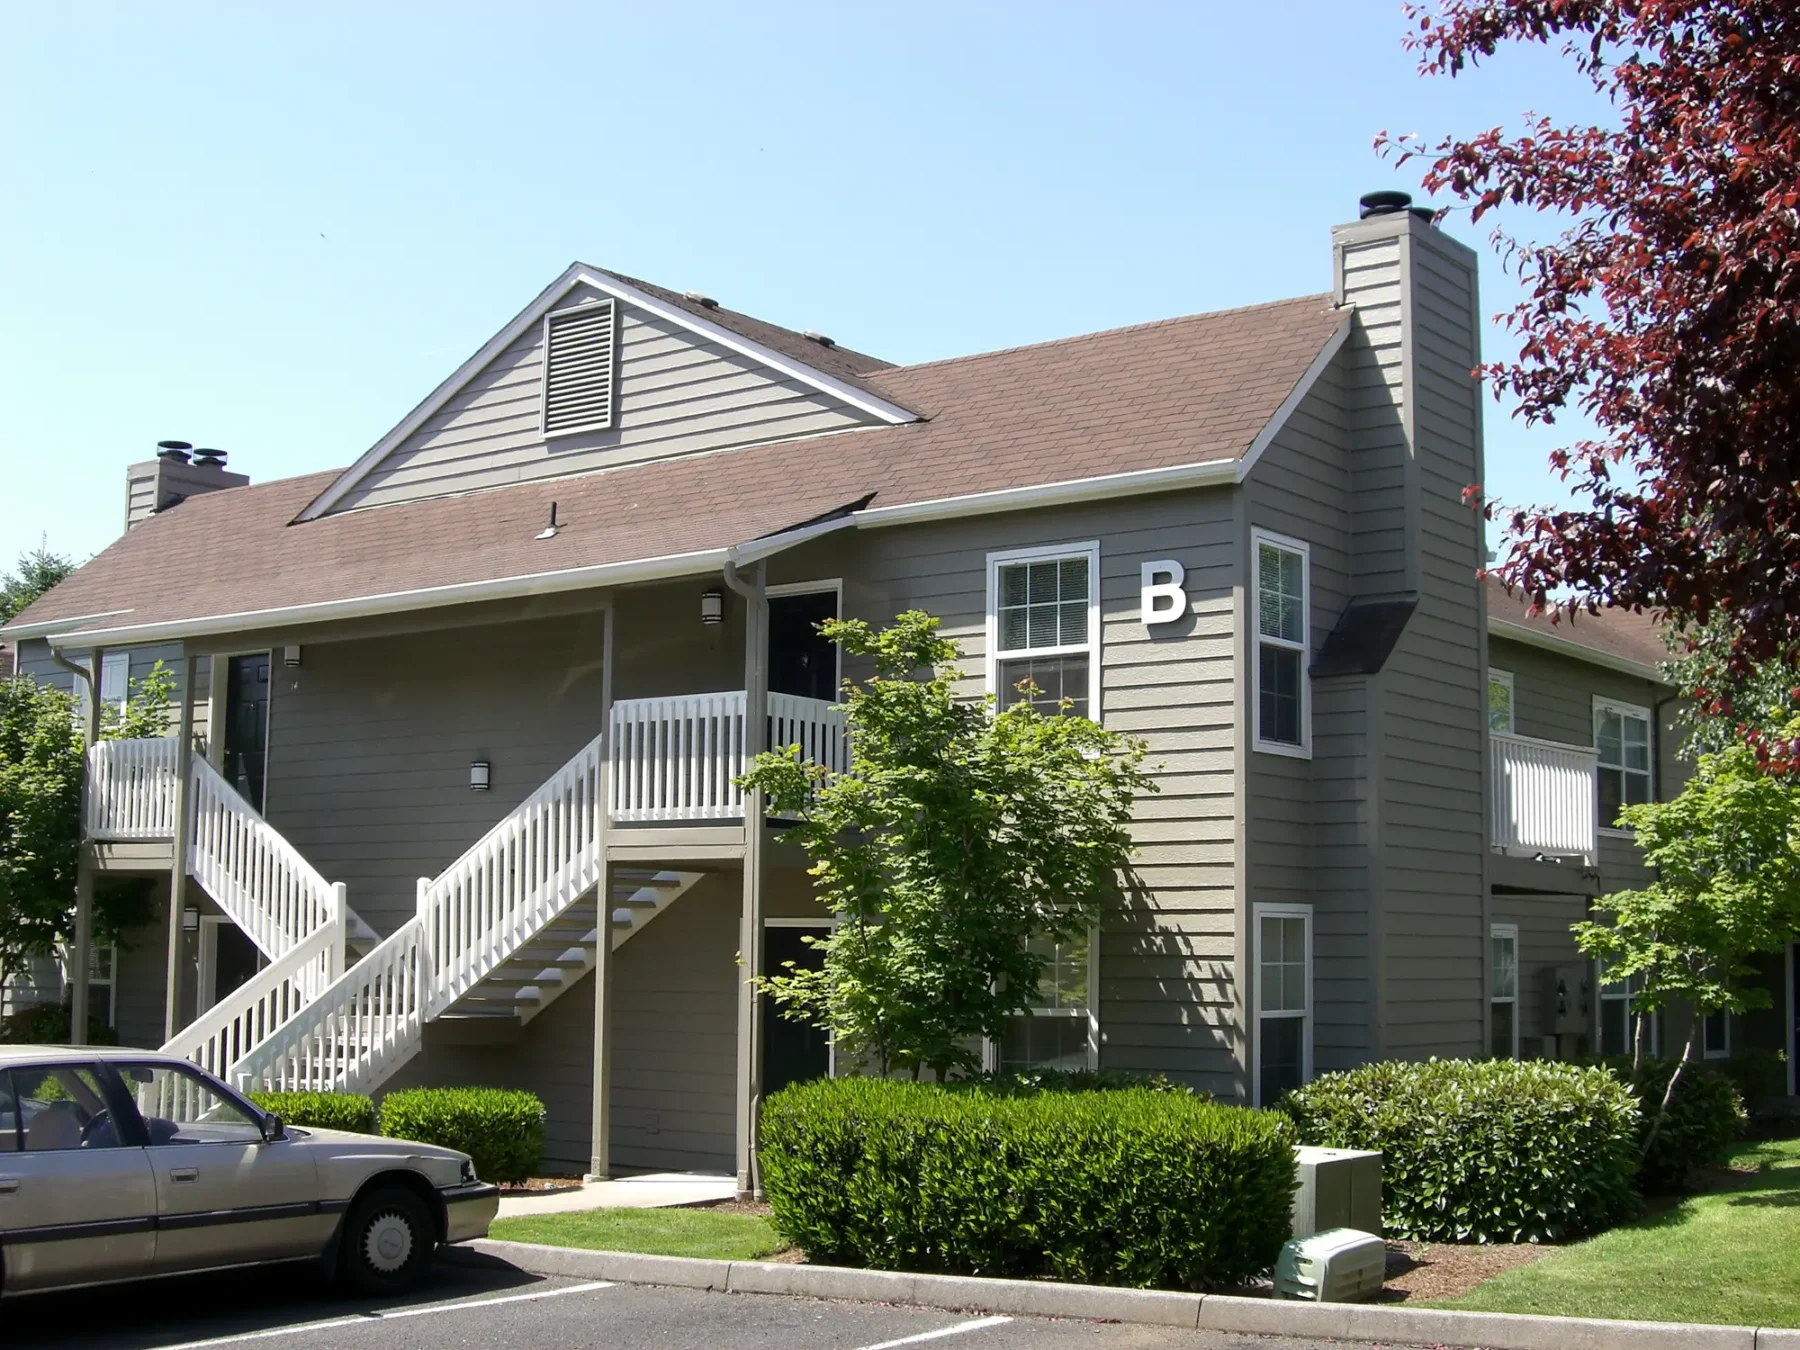 Building exterior with trees and shrubs